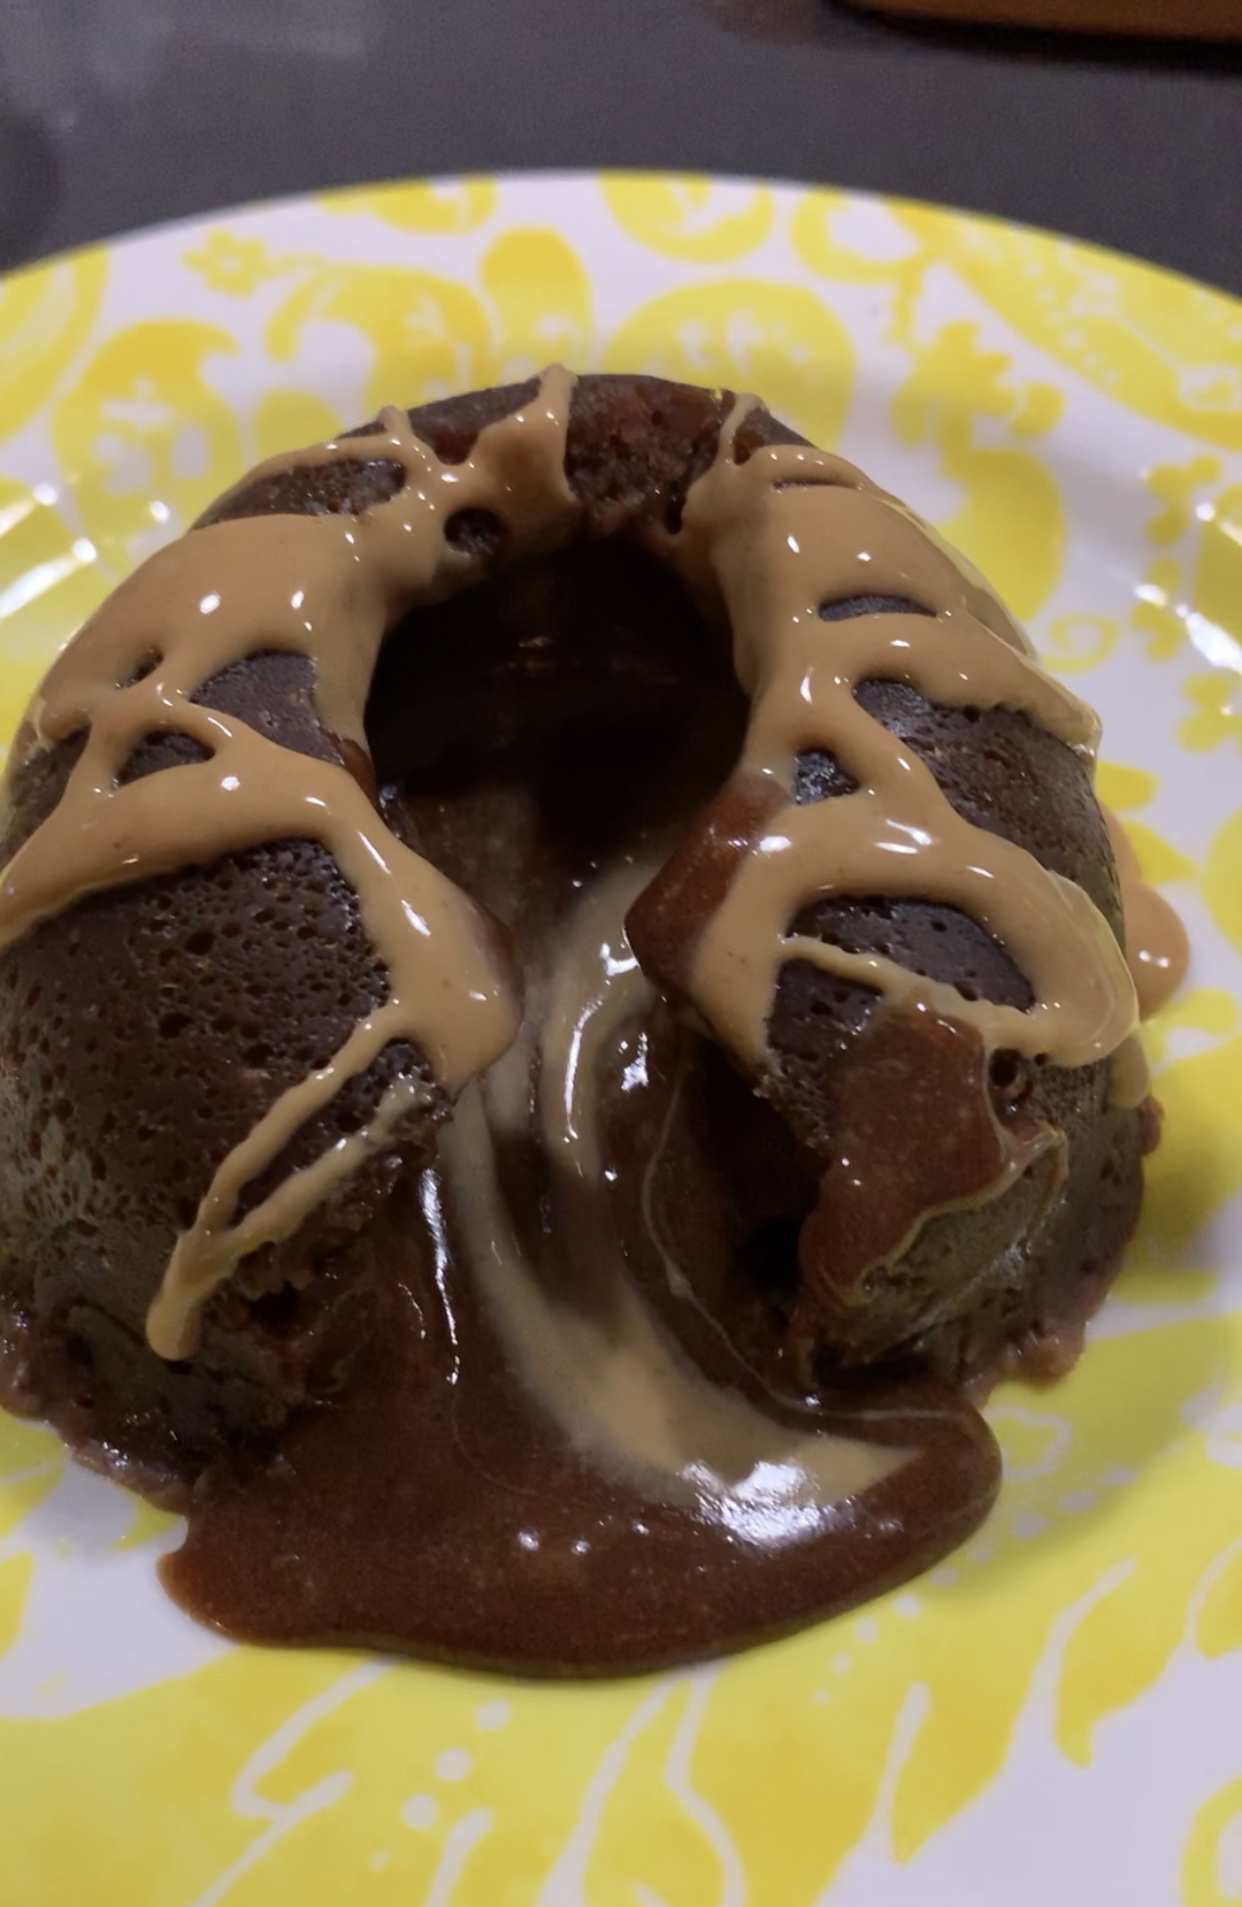 Chocolate lava cake - one of the first 25 Recipes I made with My Instant Pot